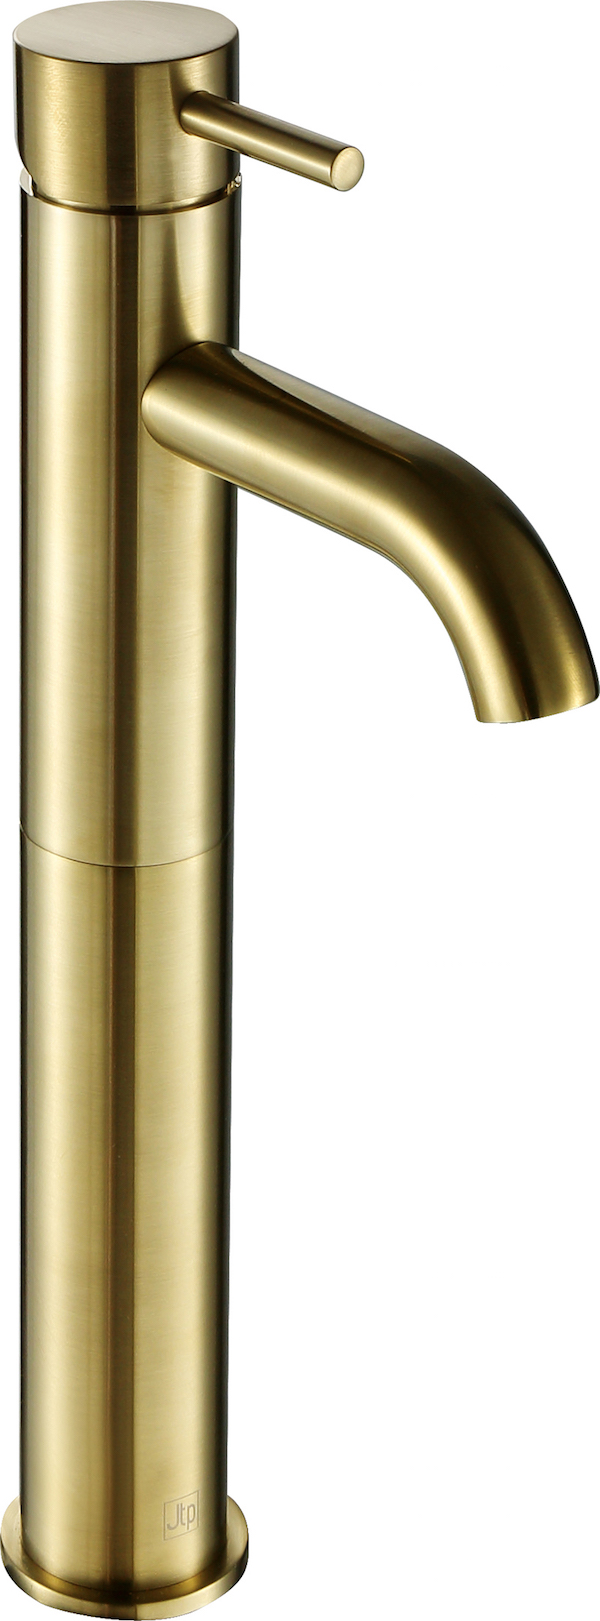 VOS Brushed Brass, Single Lever Tall Basin Mixer - Just Taps